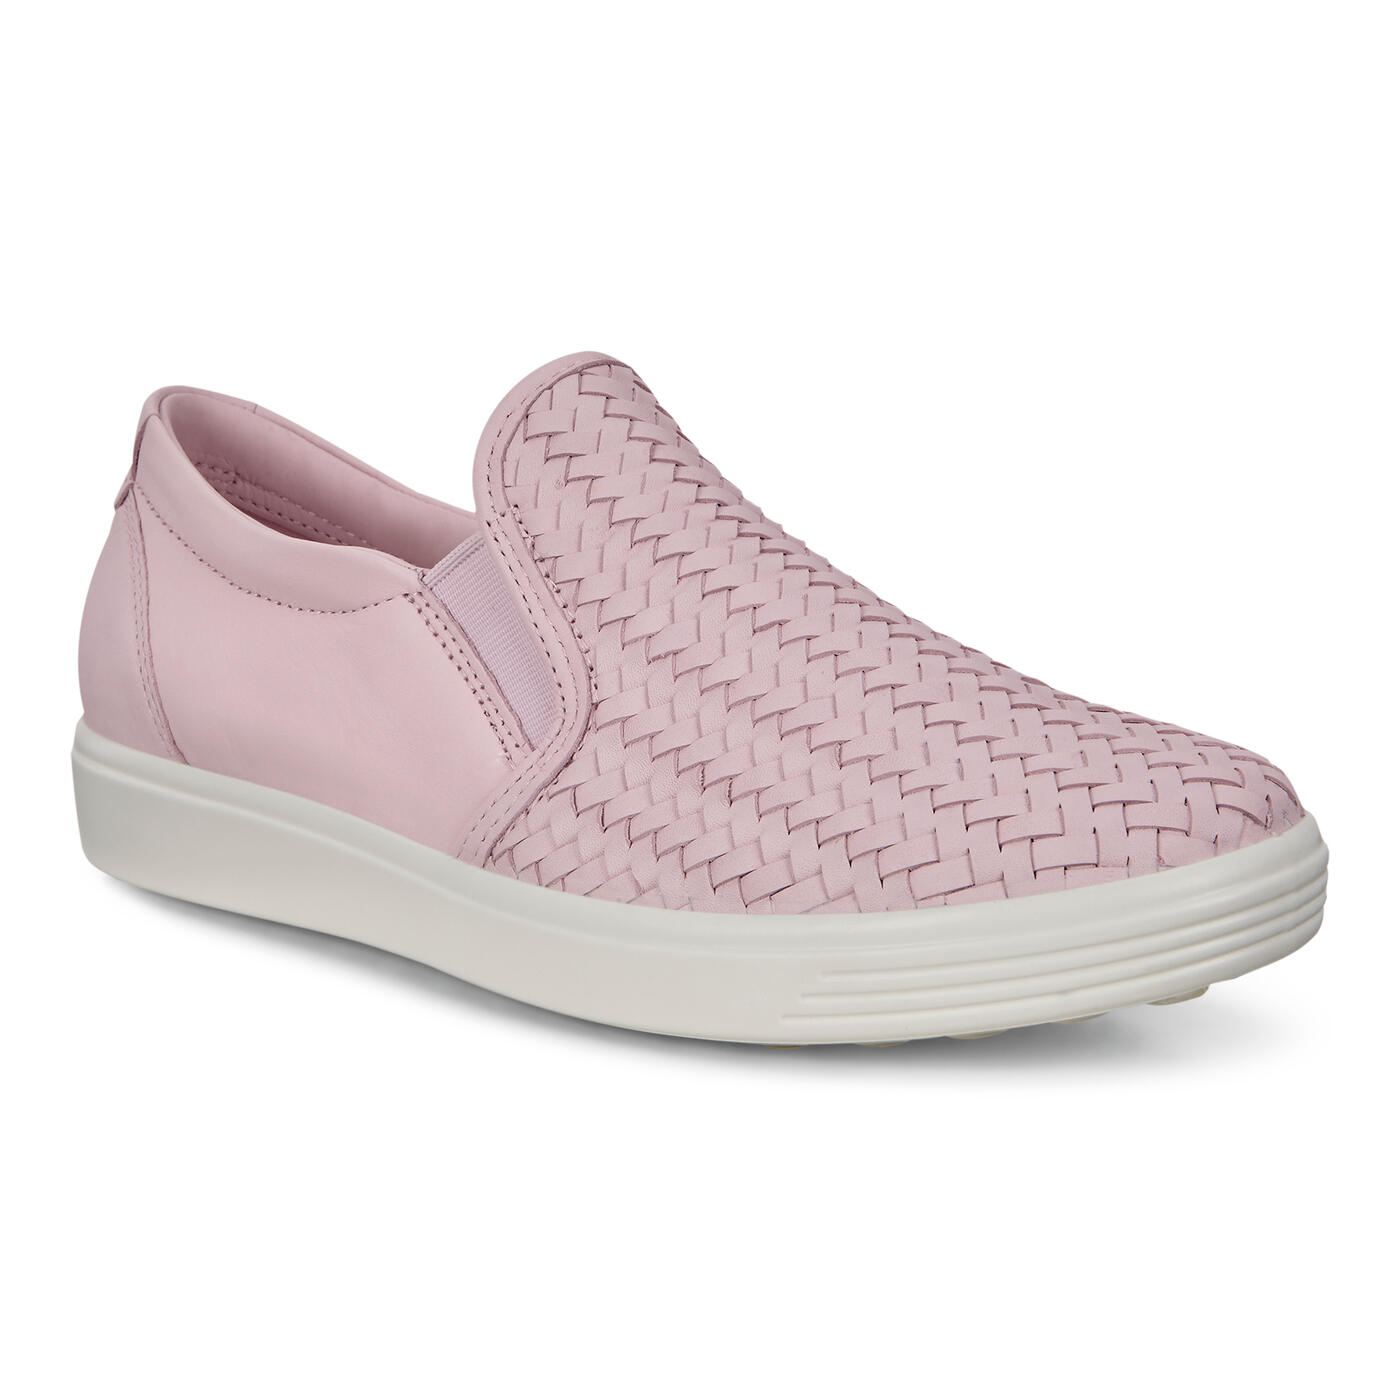 Women's Soft 7 Slip-on Shoes | Order Today | ECCO® Shoes